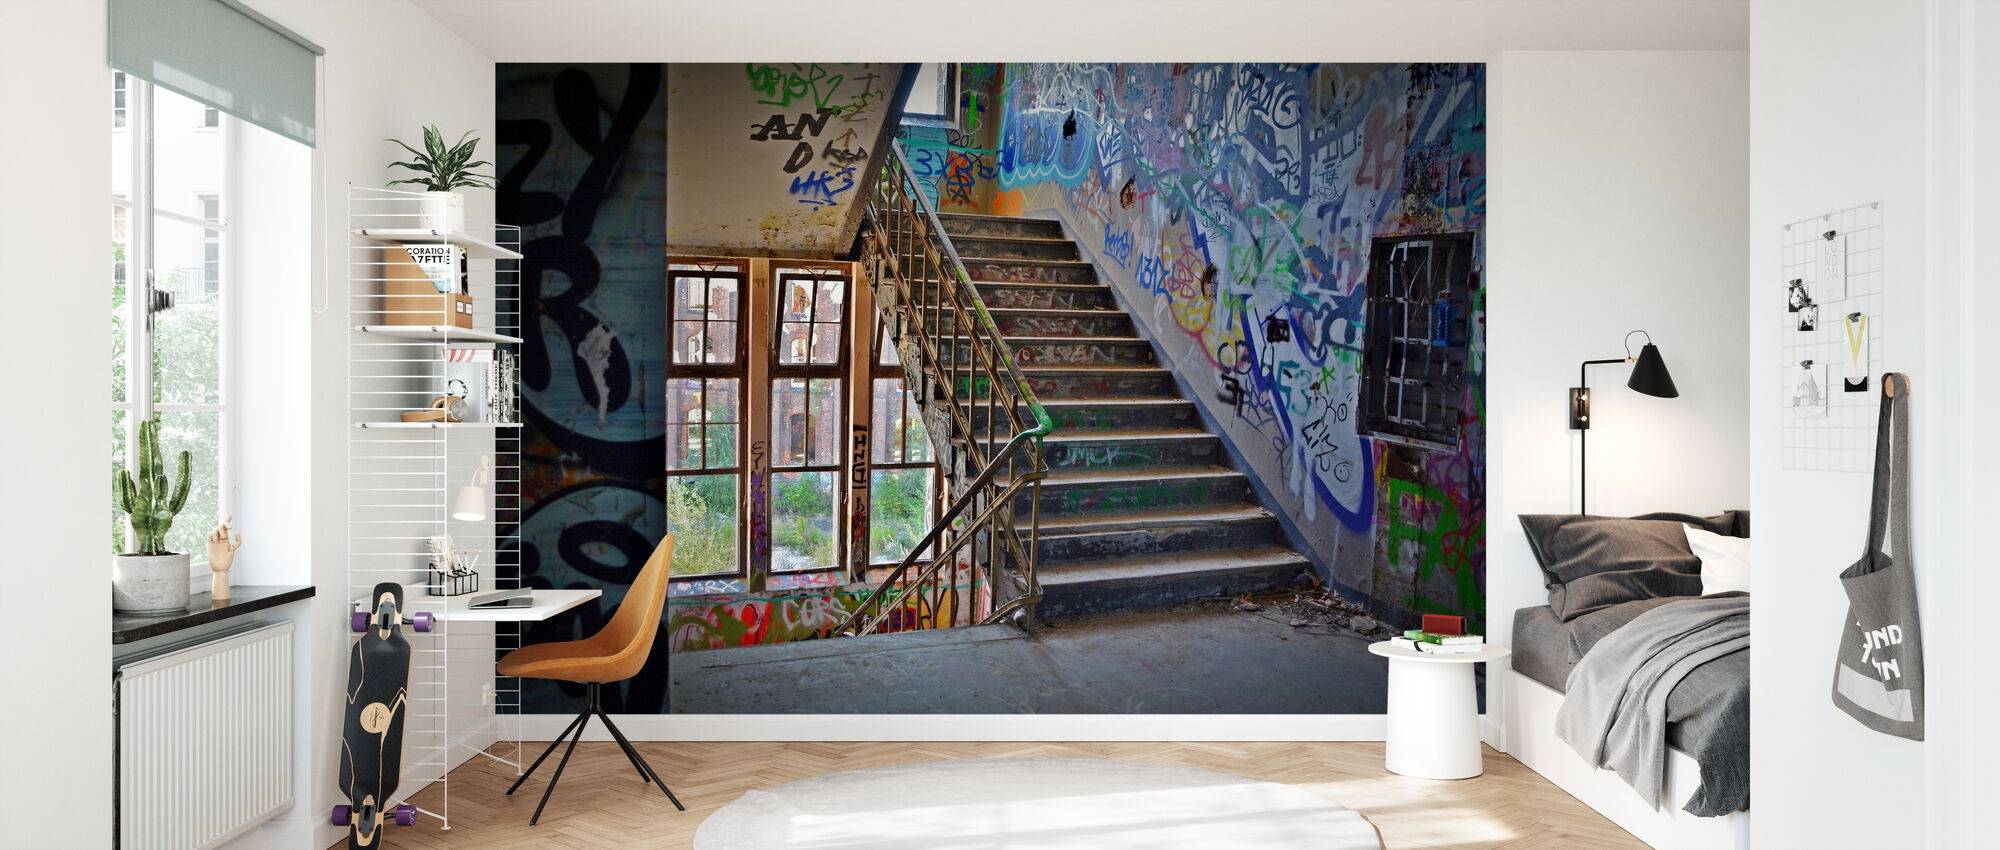 Industrial Building Staircase High Quality Wall Murals With